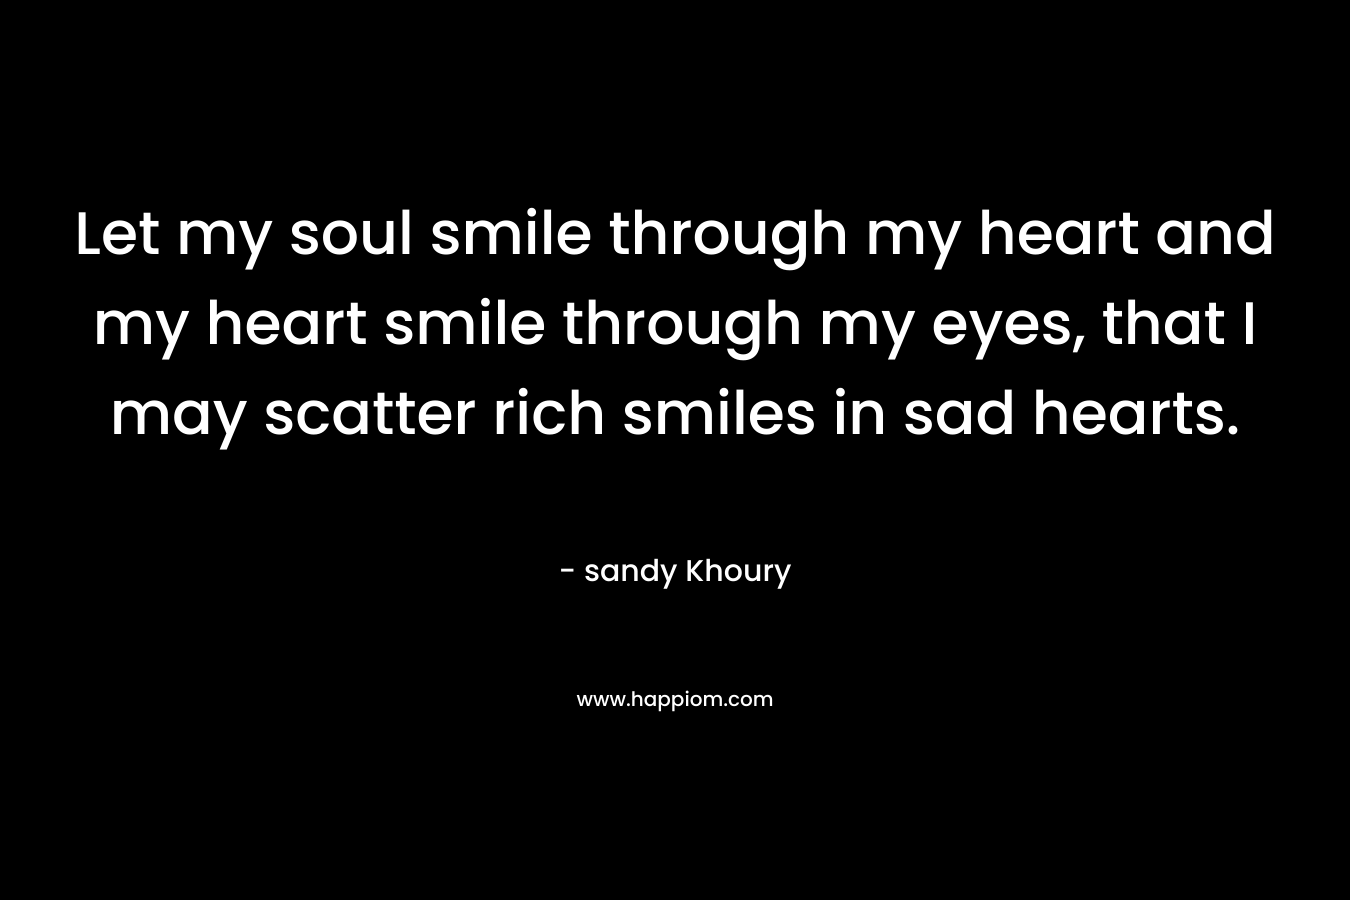 Let my soul smile through my heart and my heart smile through my eyes, that I may scatter rich smiles in sad hearts. – sandy Khoury